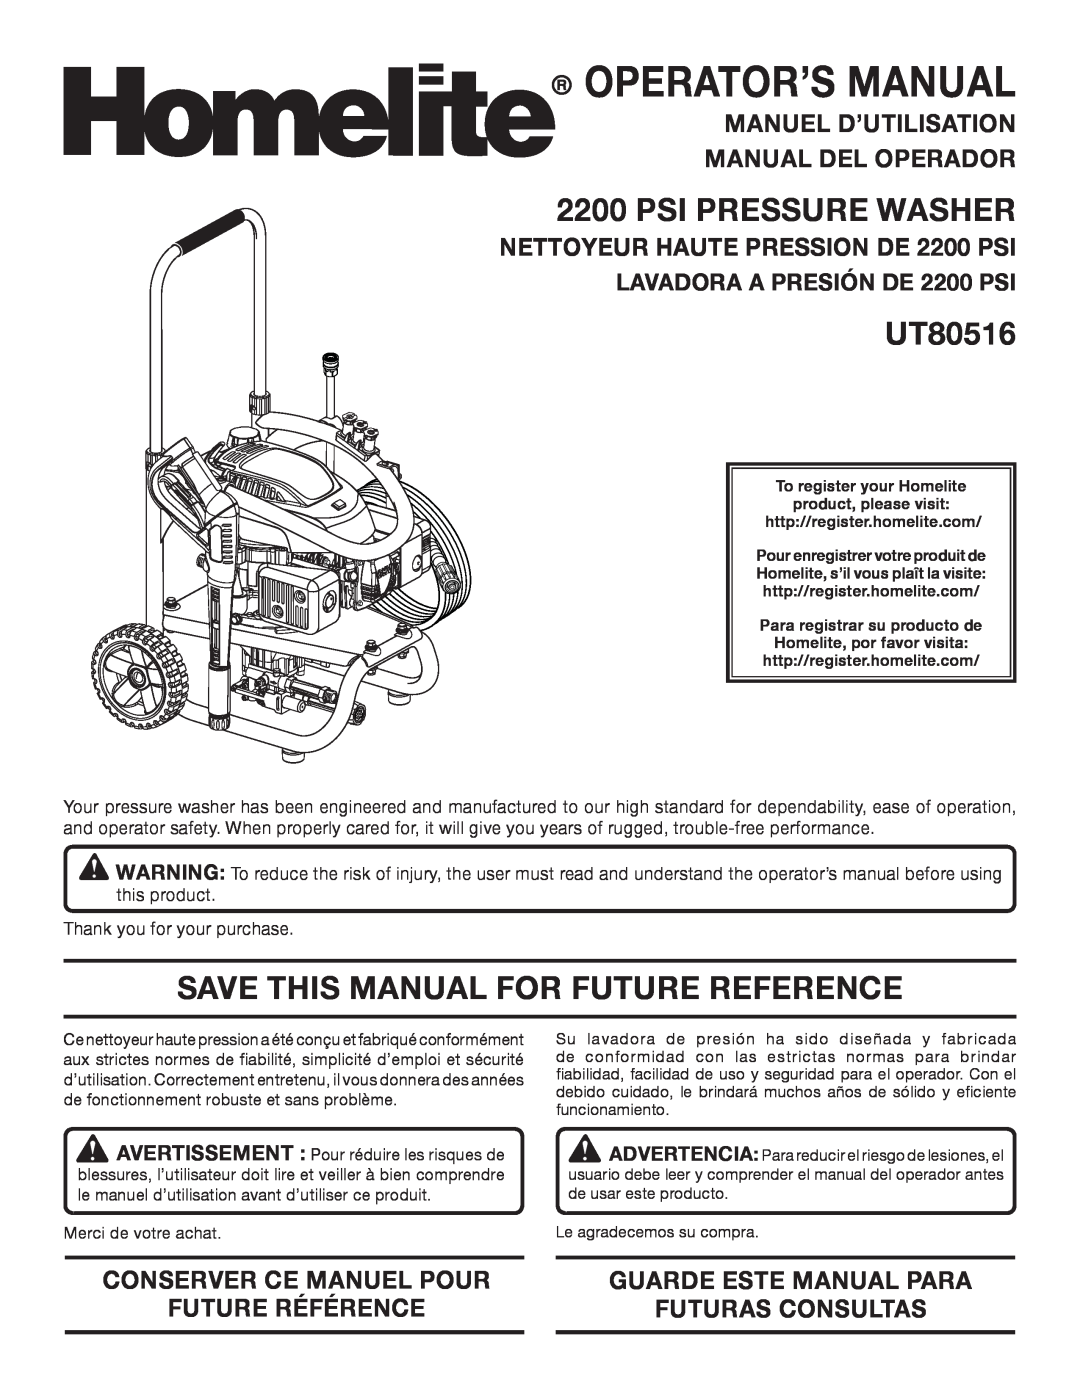 Homelite UT80516 manuel dutilisation Psi Pressure Washer, Save This Manual For Future Reference, Operator’S Manual 